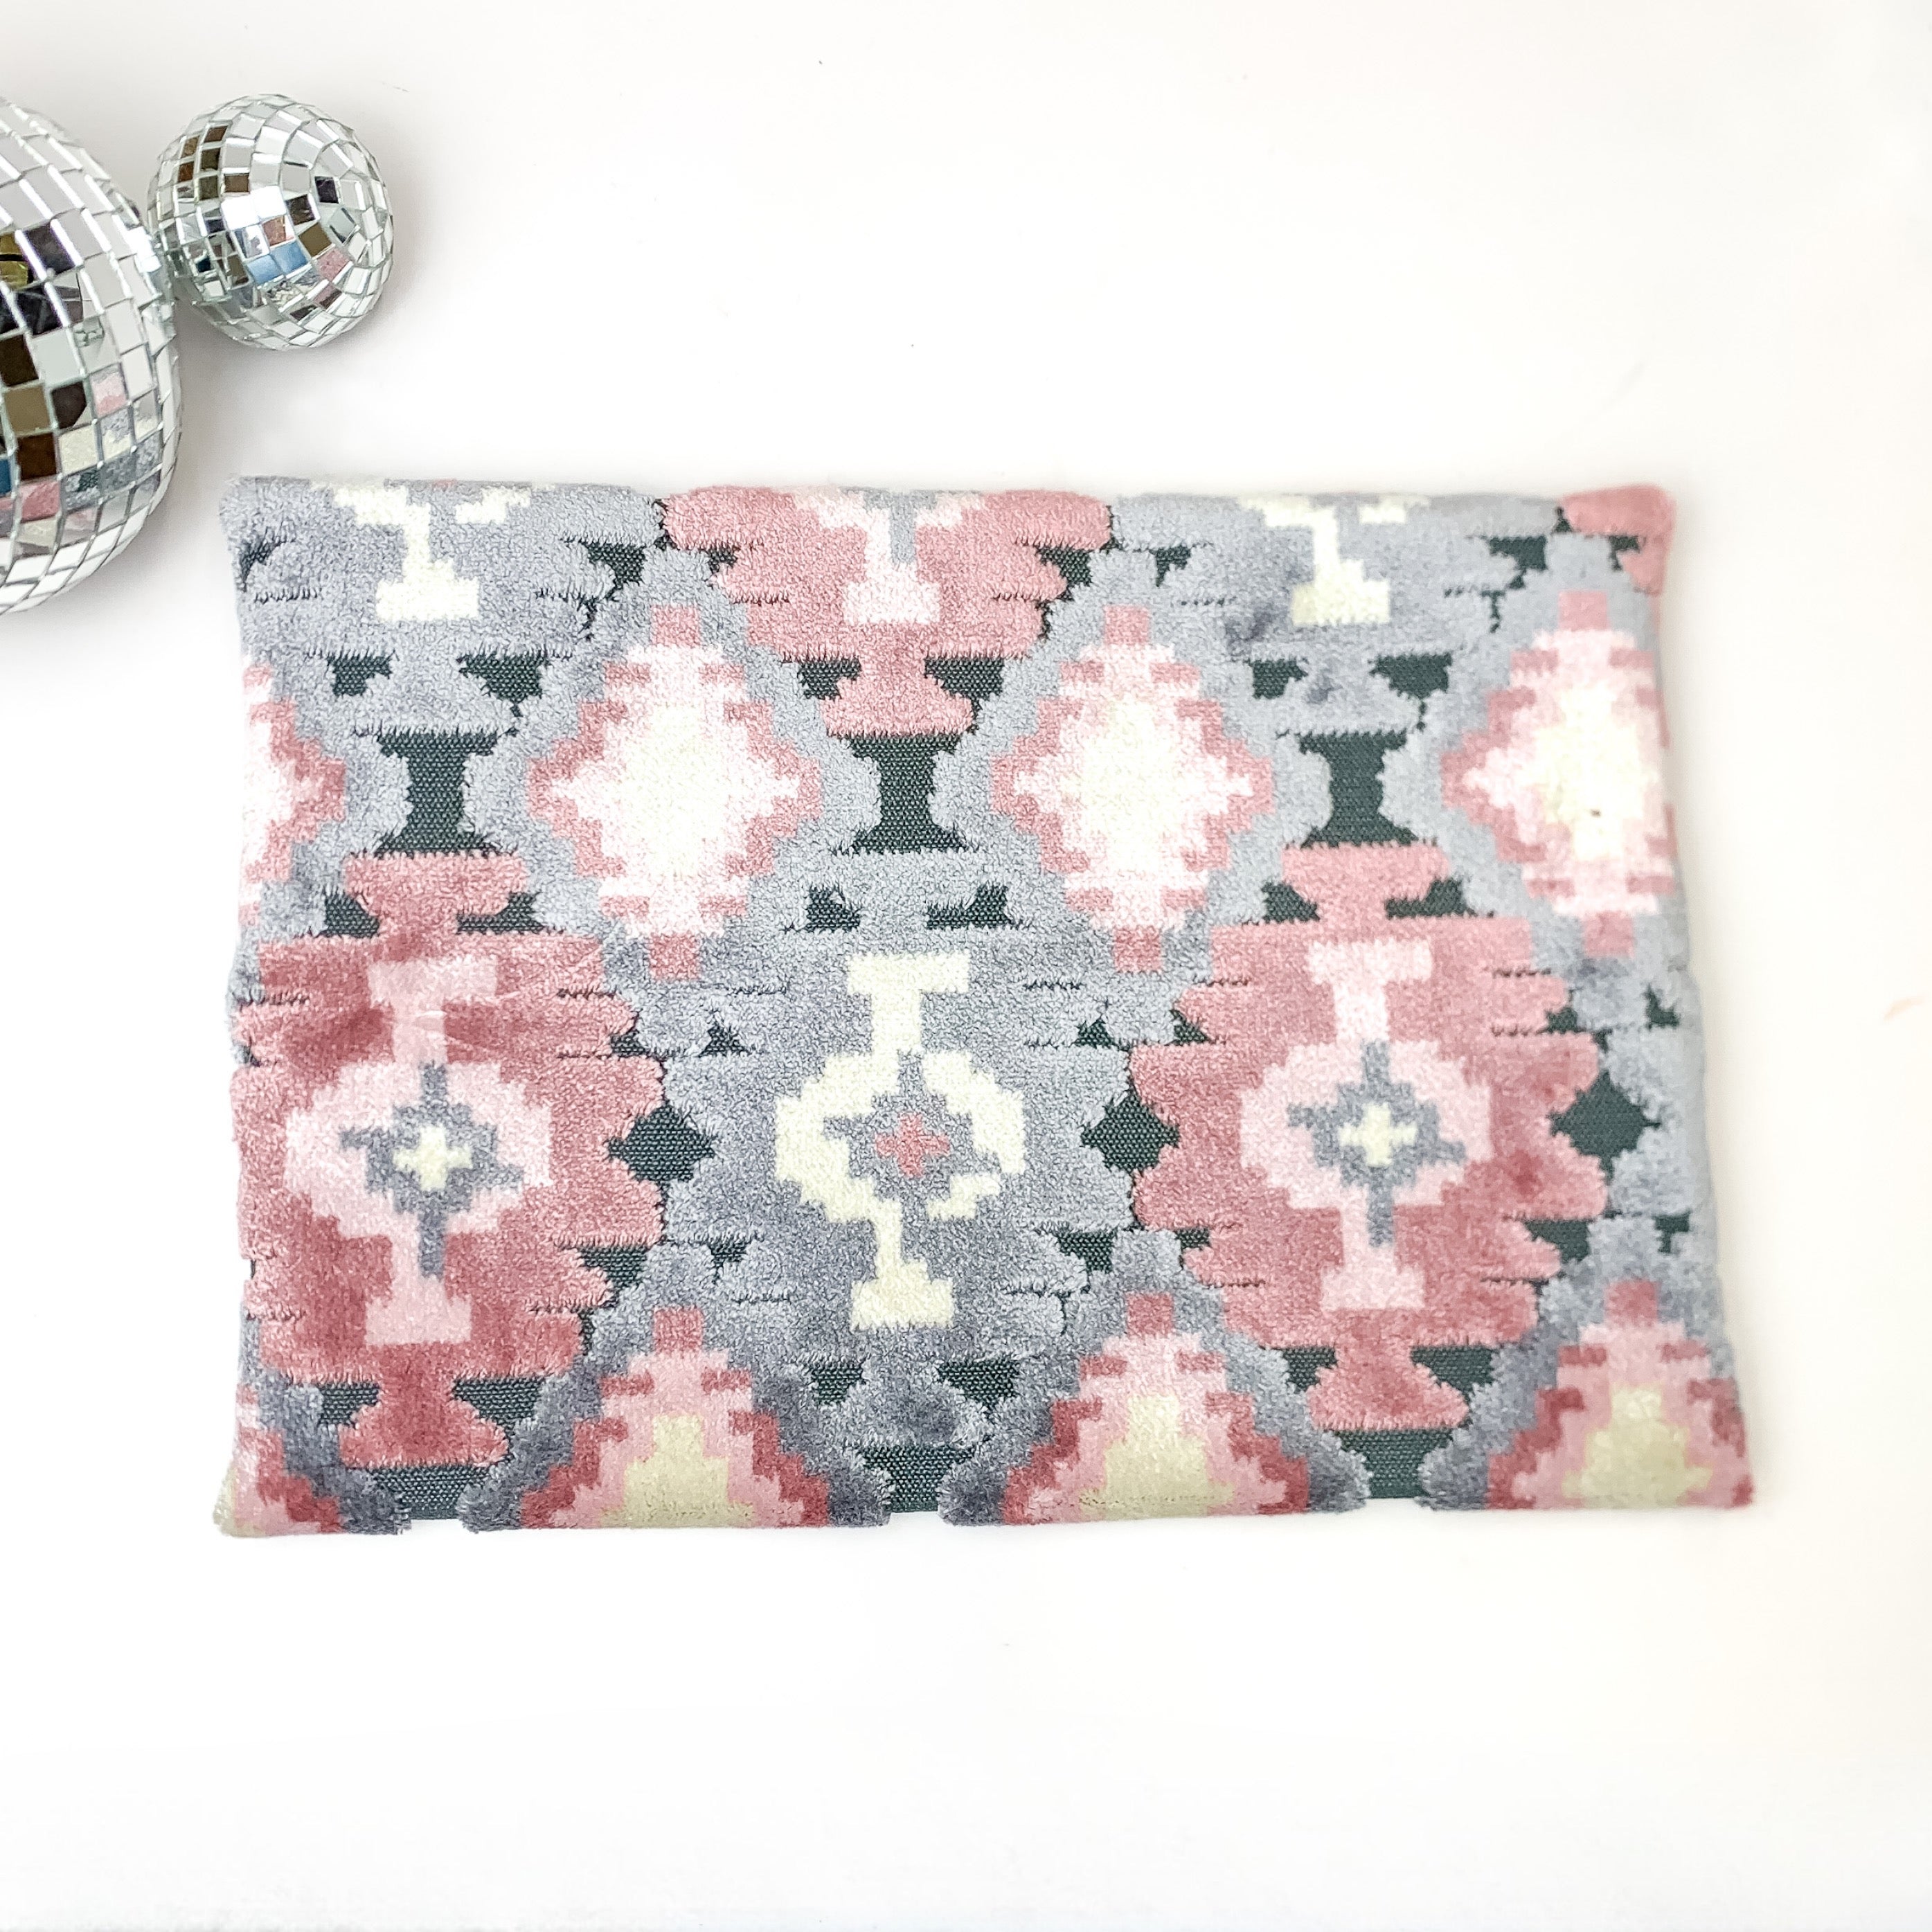 Makeup Junkie | Medium Blush Aztec Lay Flat Bag in Blush Pink and Grey Mix - Giddy Up Glamour Boutique